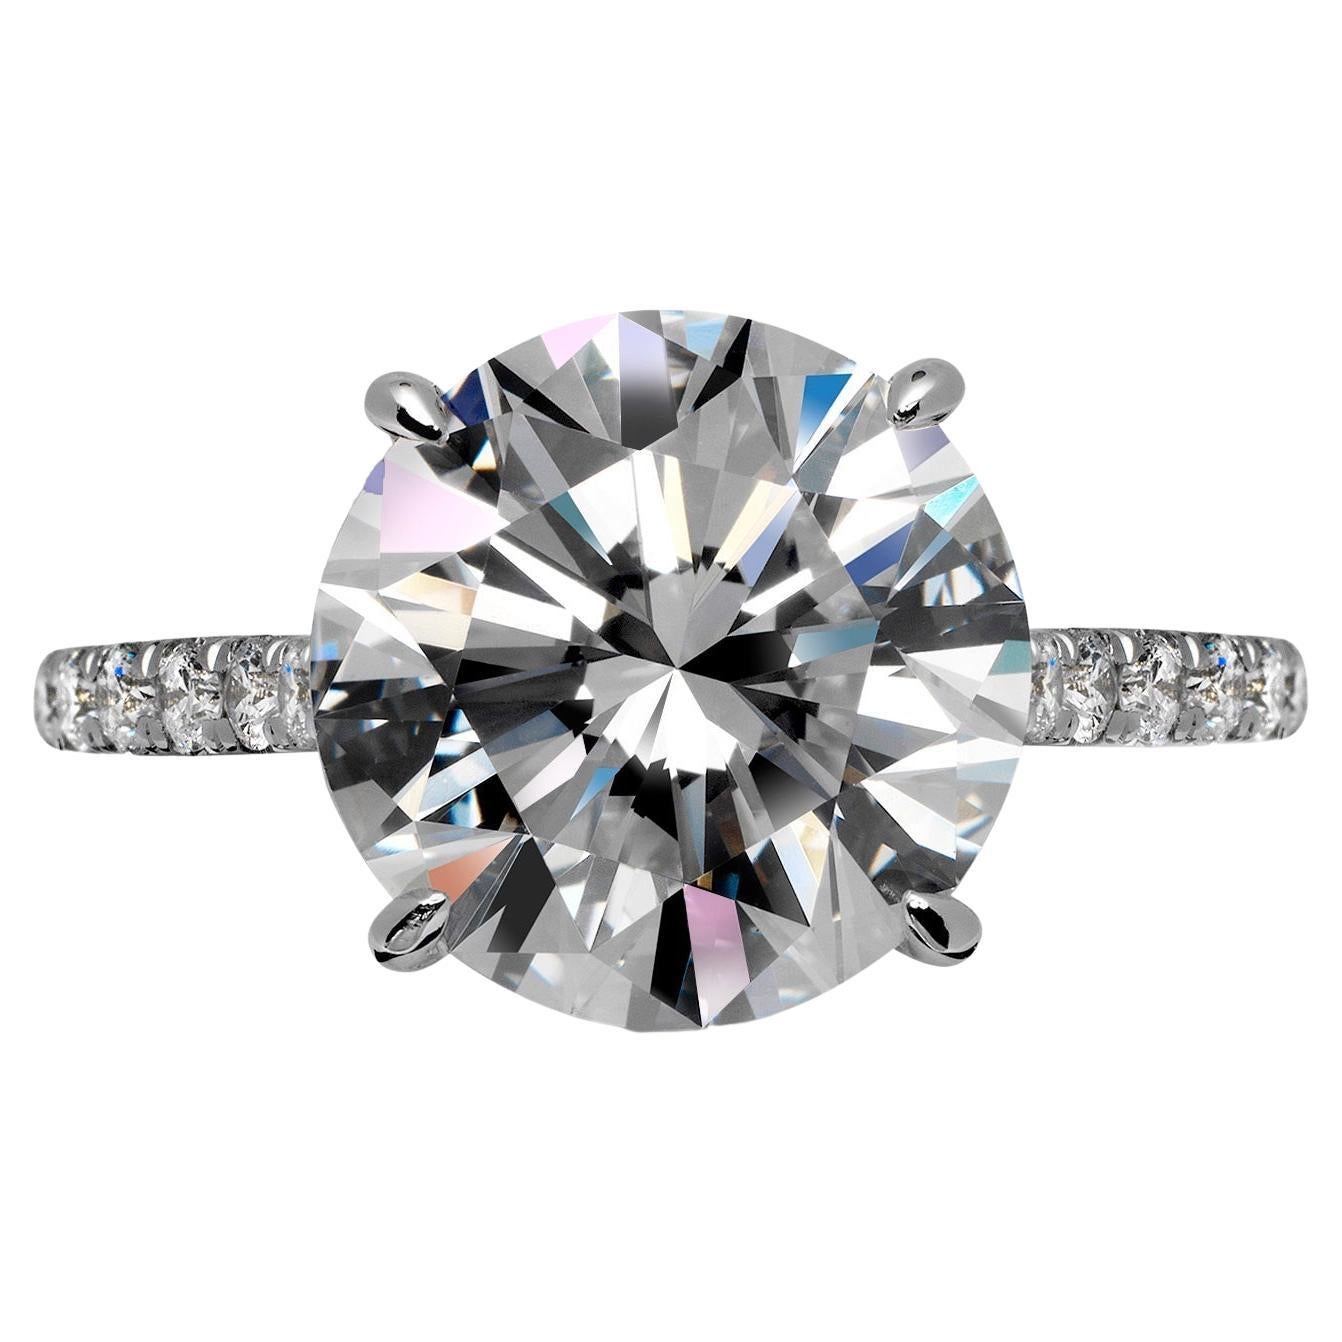 5 Carat Round Cut Diamond Engagement Ring GIA Certified E VS1 For Sale